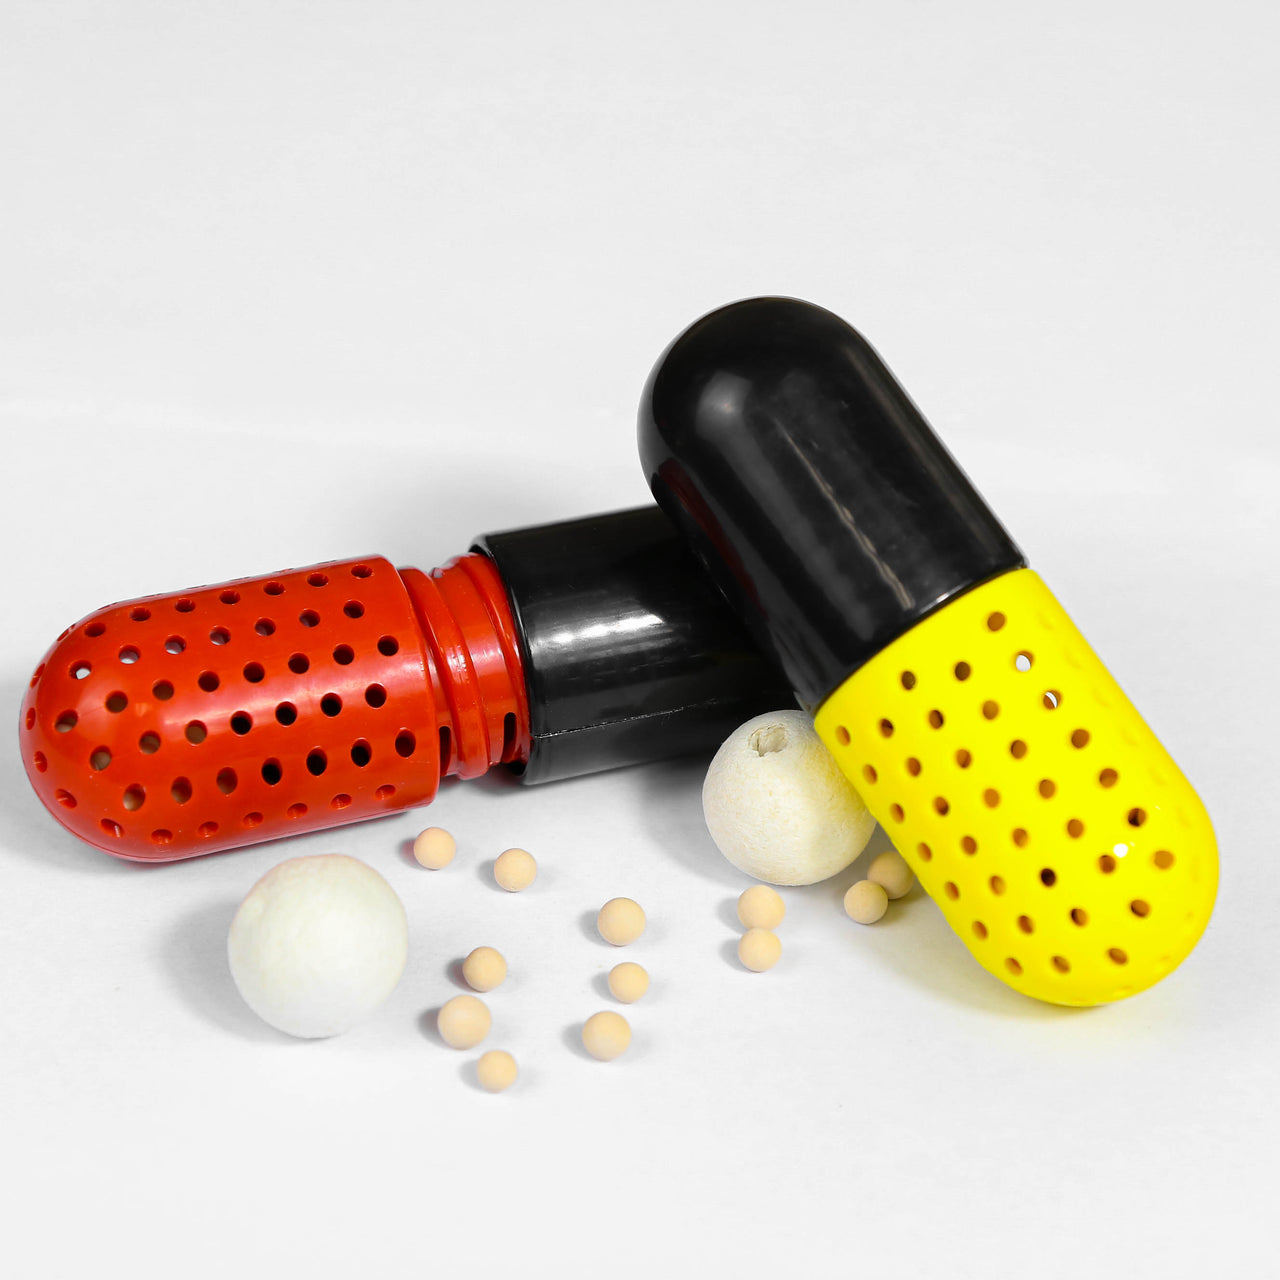 Two Pill Shape Sneaker Deodorizer Matching Bred 11s and Frozen Yellow | Yellow And Black / Red and Black Sneaker Deodorizers